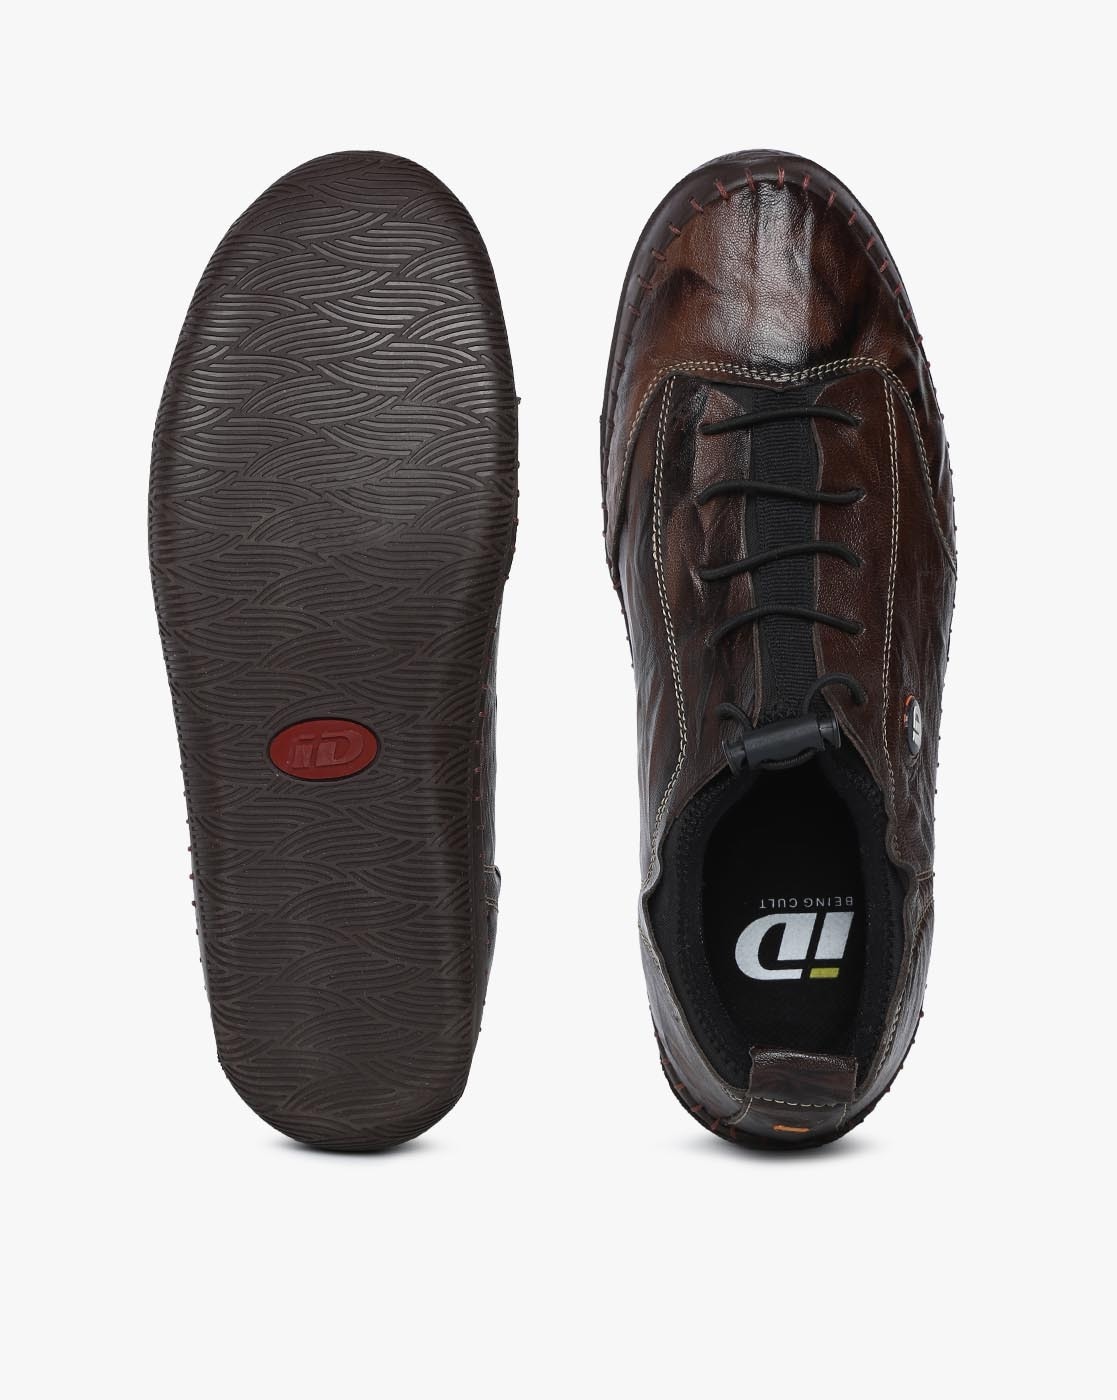 id being cult shoes online